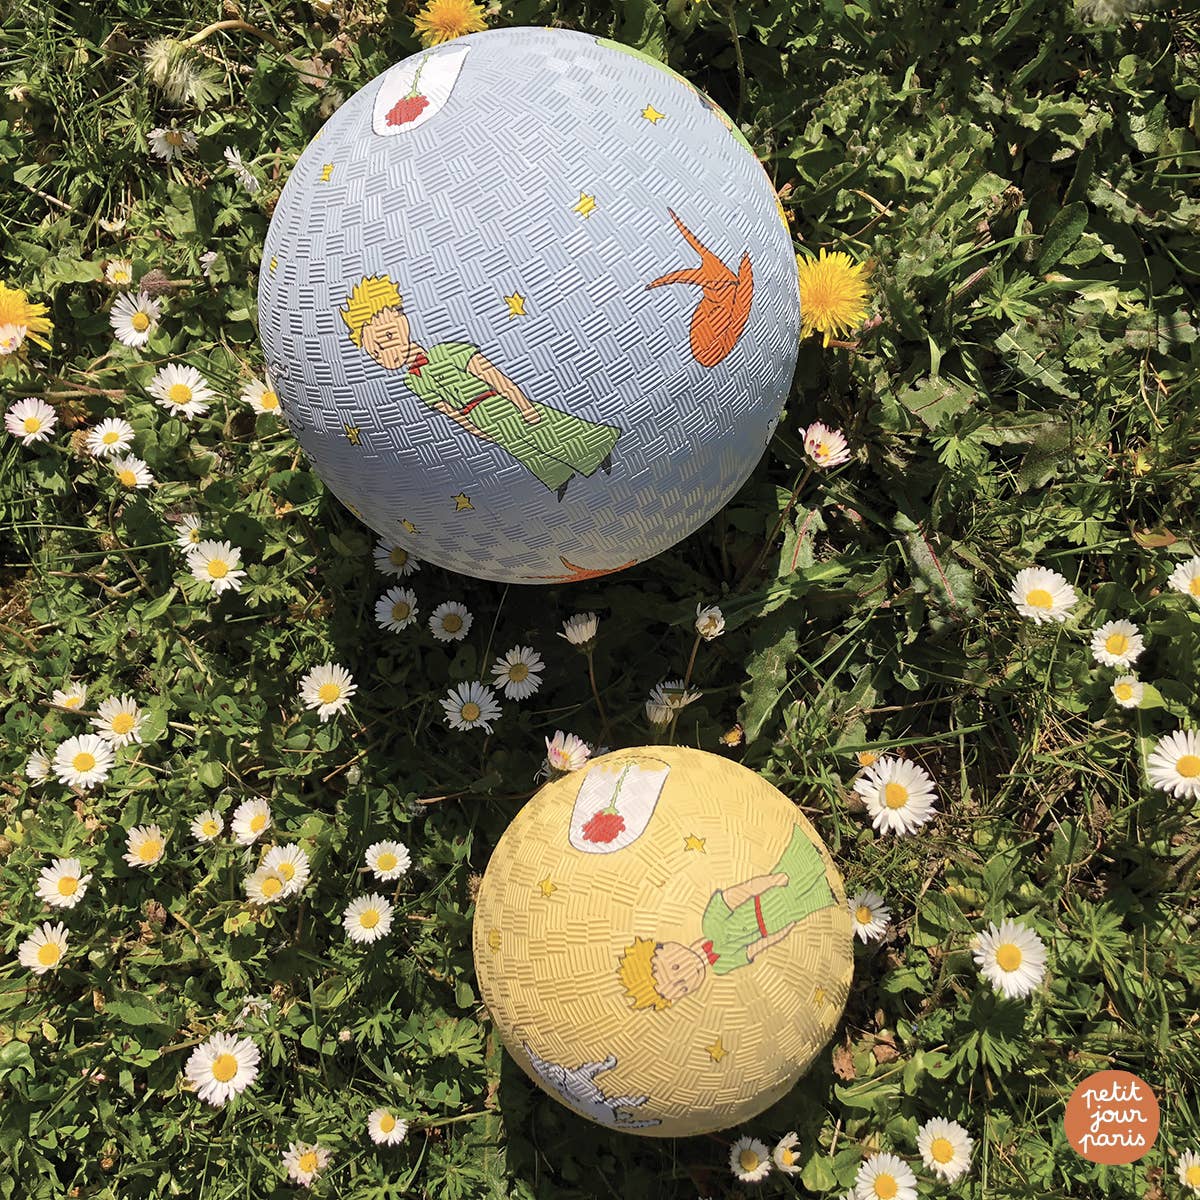 Small playground ball -The Little Prince